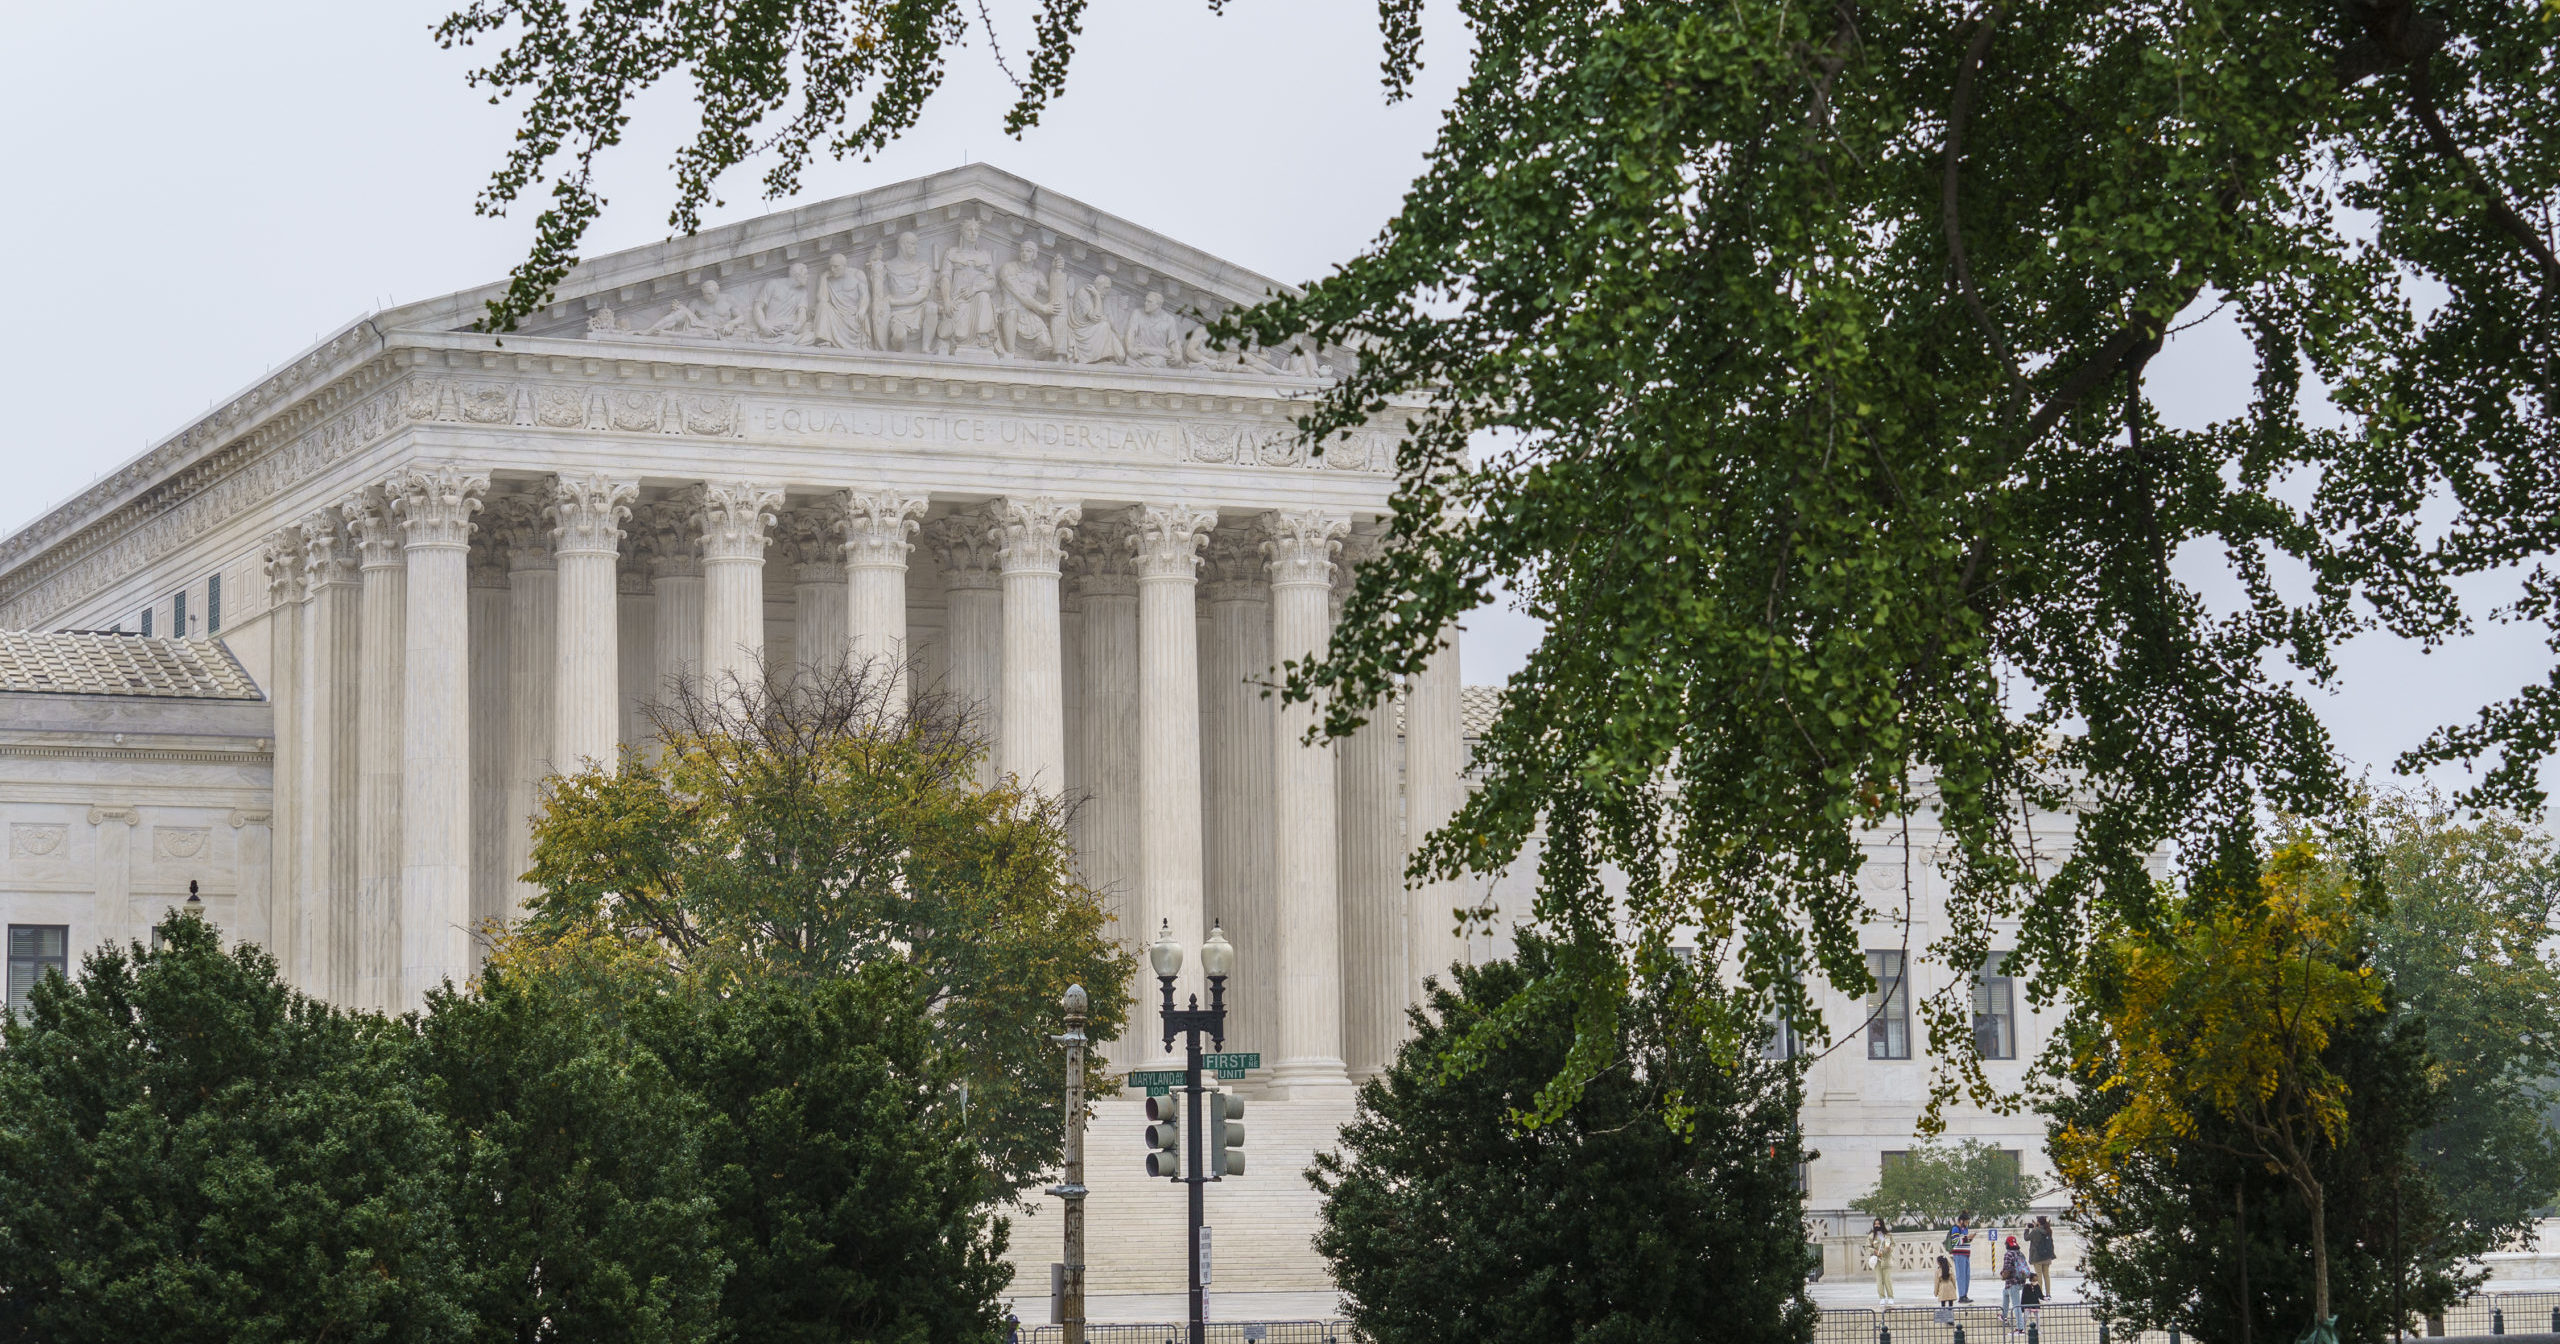 The Supreme Court is seen in Washington, D.C., on Oct. 21, 2020.